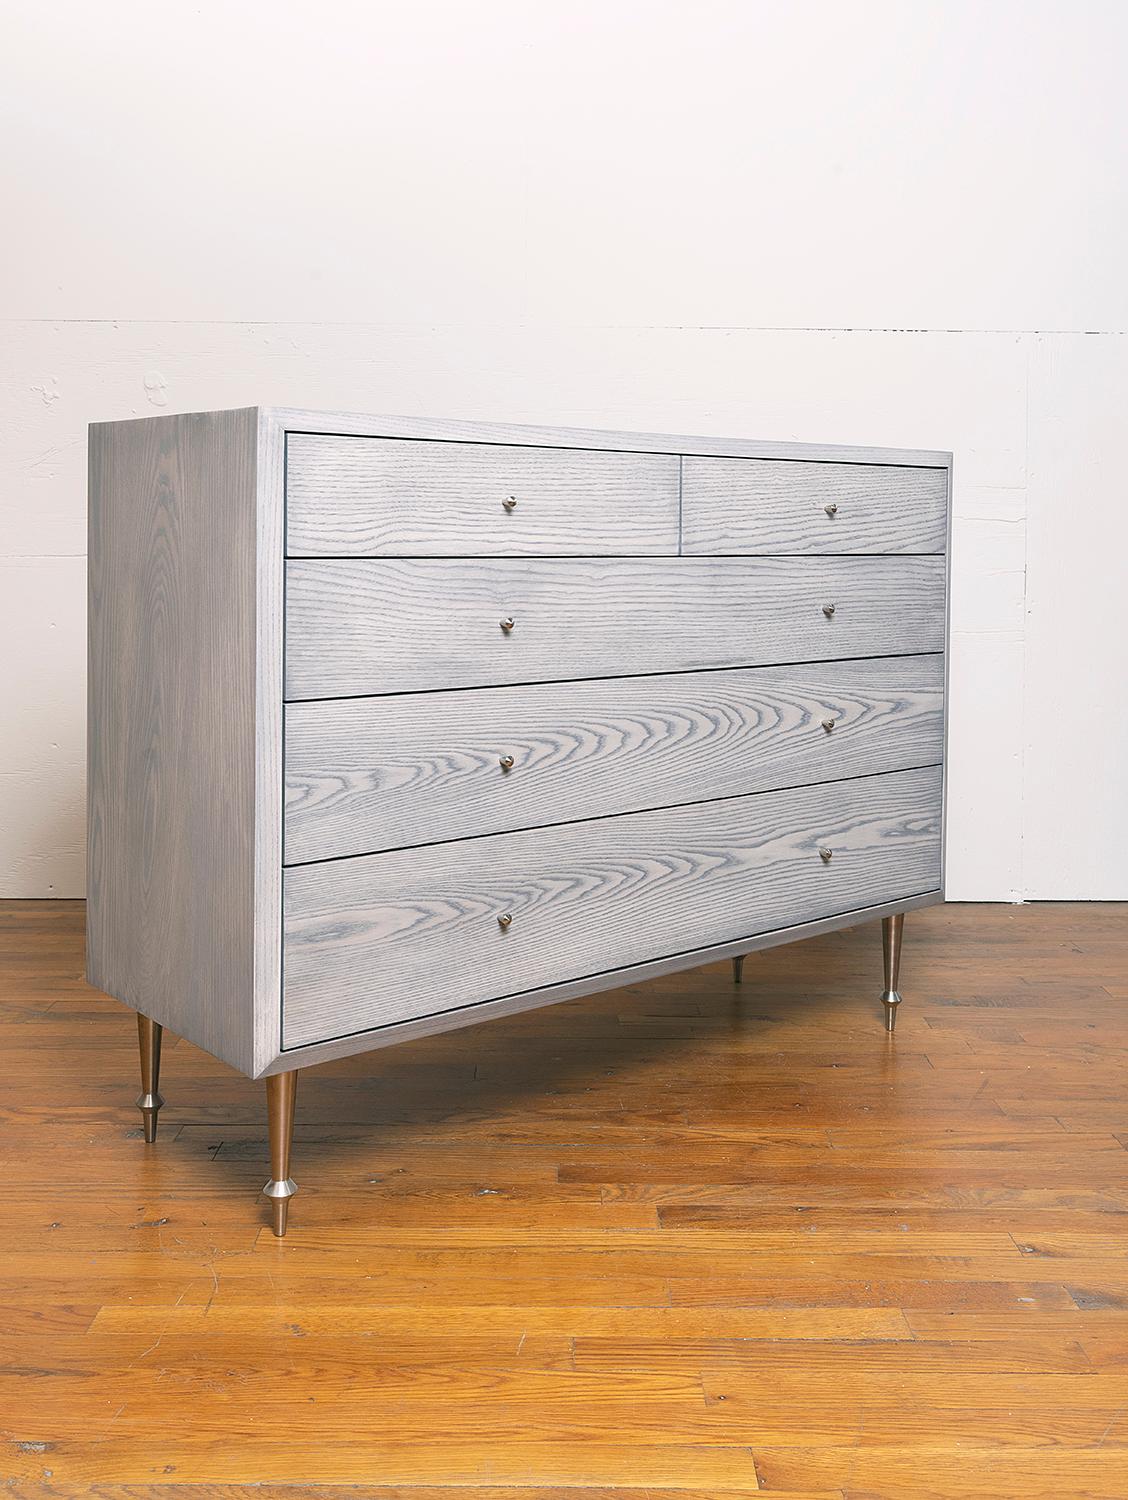 Solid ash with nickel plated legs and drawer pulls.
Greywashed finish.
Dimensions: 48” W x 18” D x 36